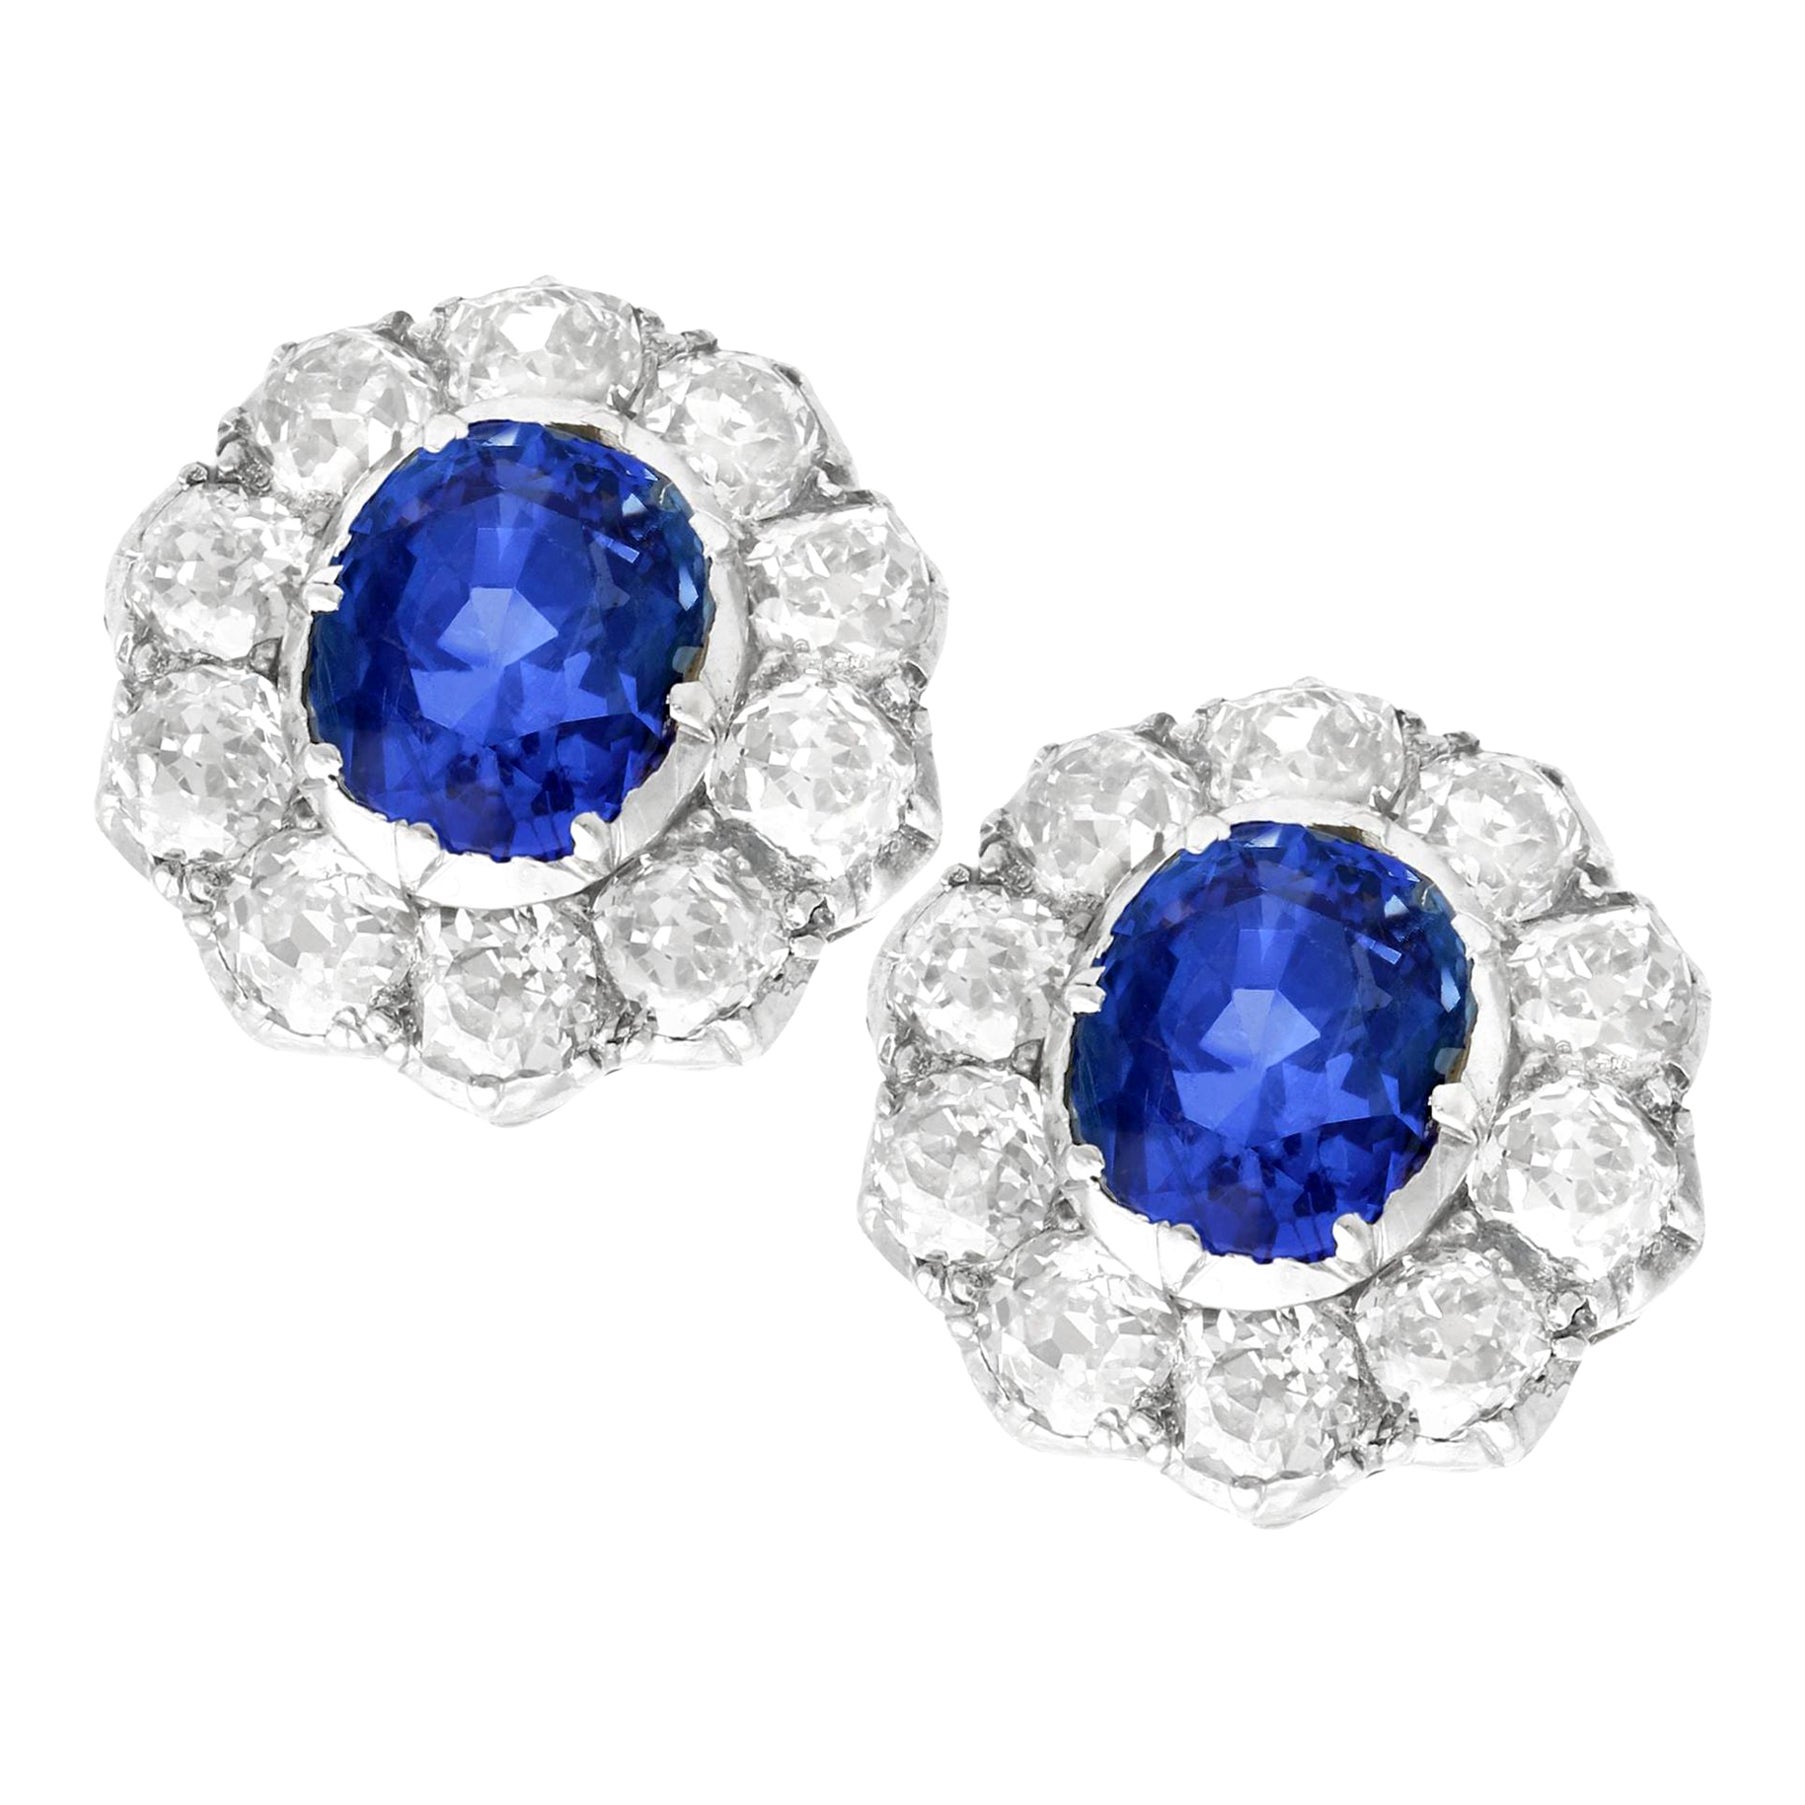 2.10Ct Basaltic Sapphire and 3.30Ct Diamond Yellow Gold Cluster Earrings